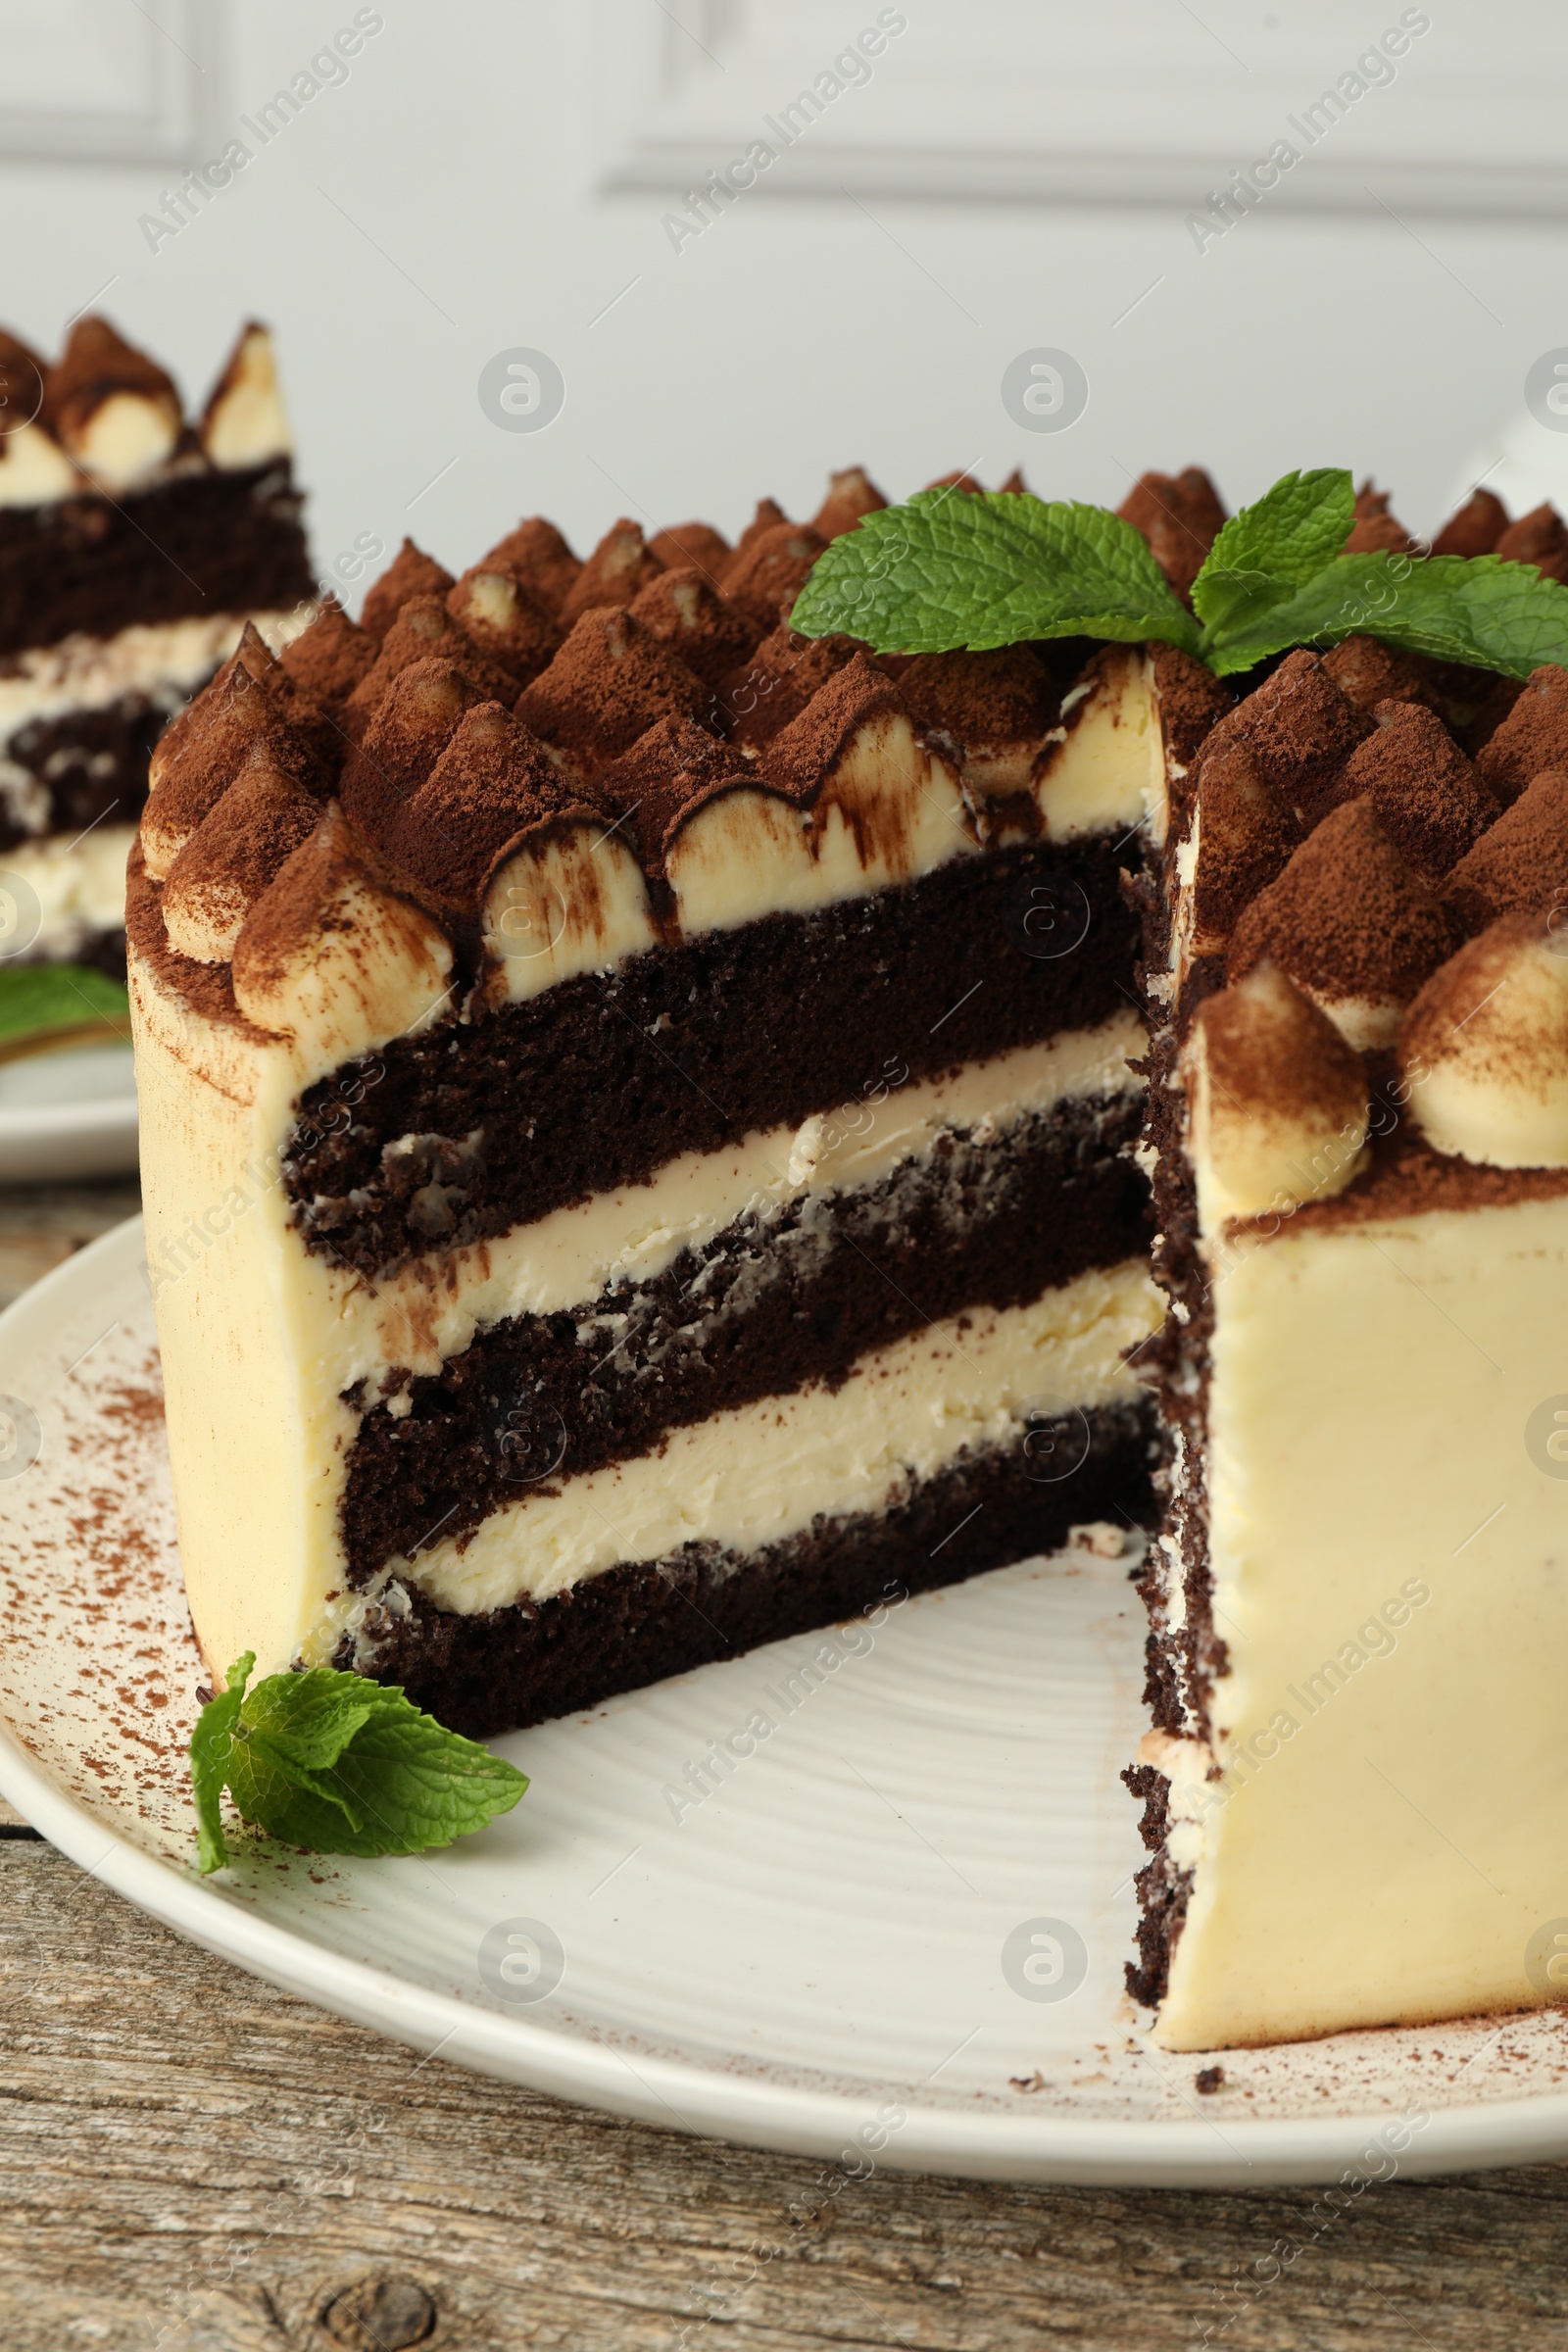 Photo of Delicious tiramisu cake with cocoa powder and mint leaves on wooden table, closeup